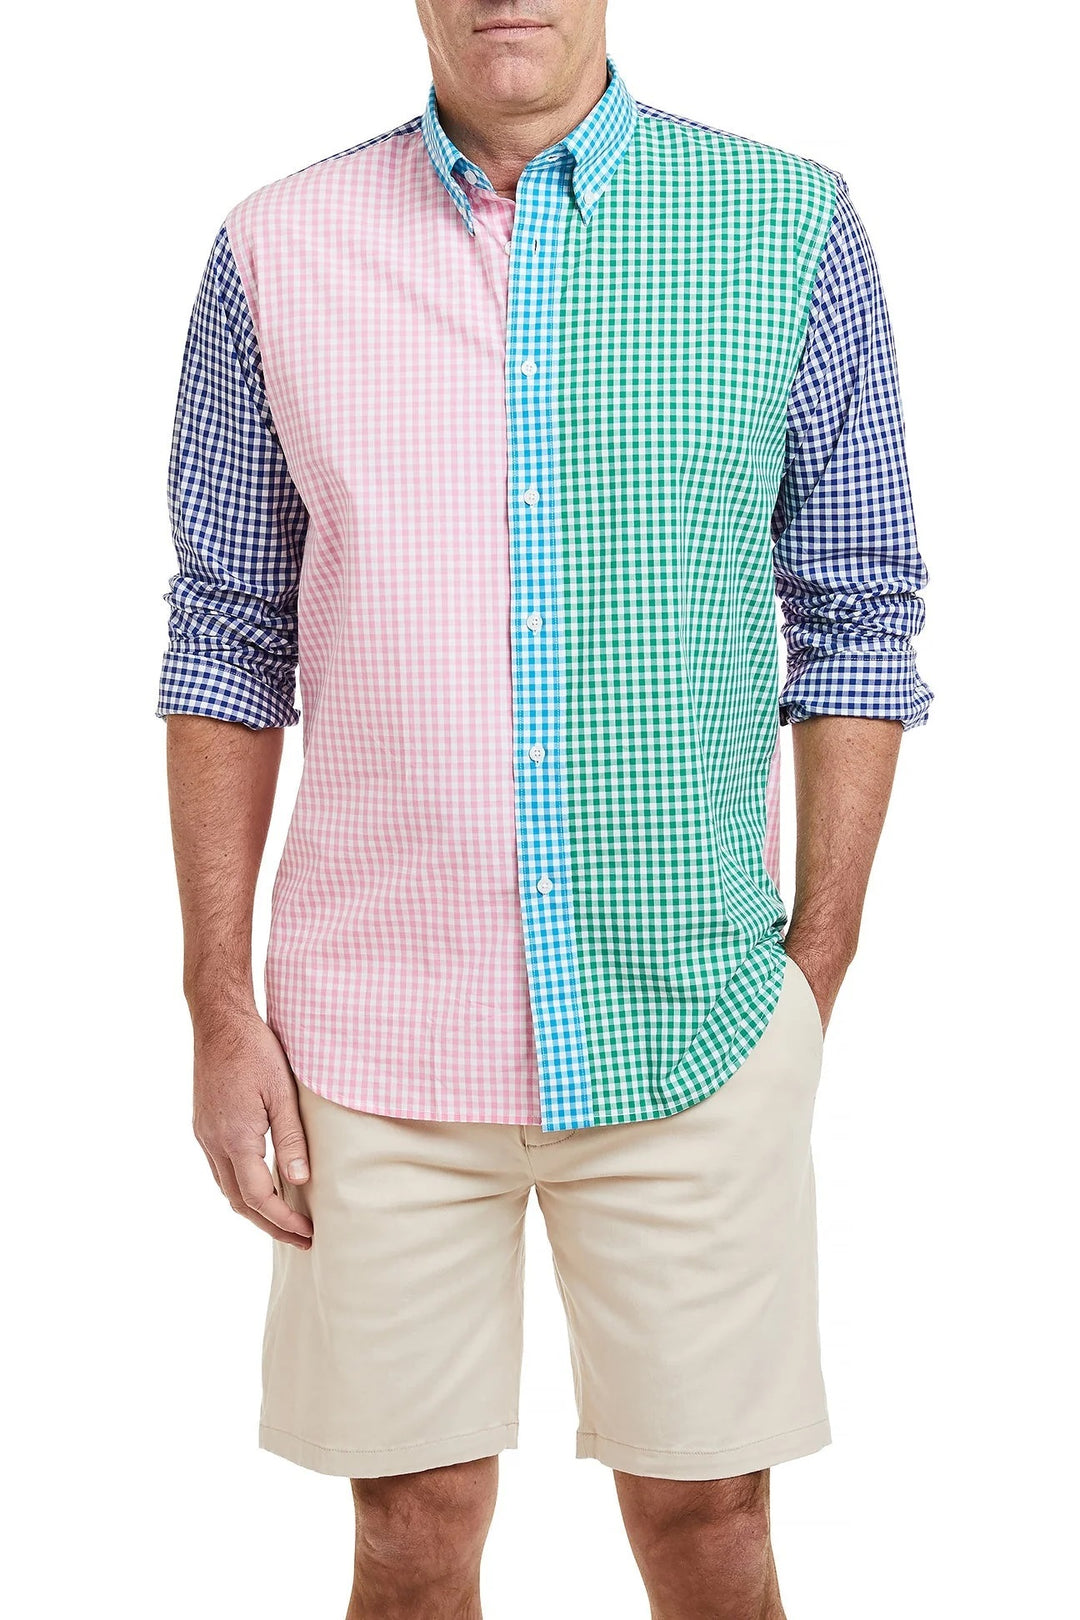 PARTY GINGHAM SHIRT